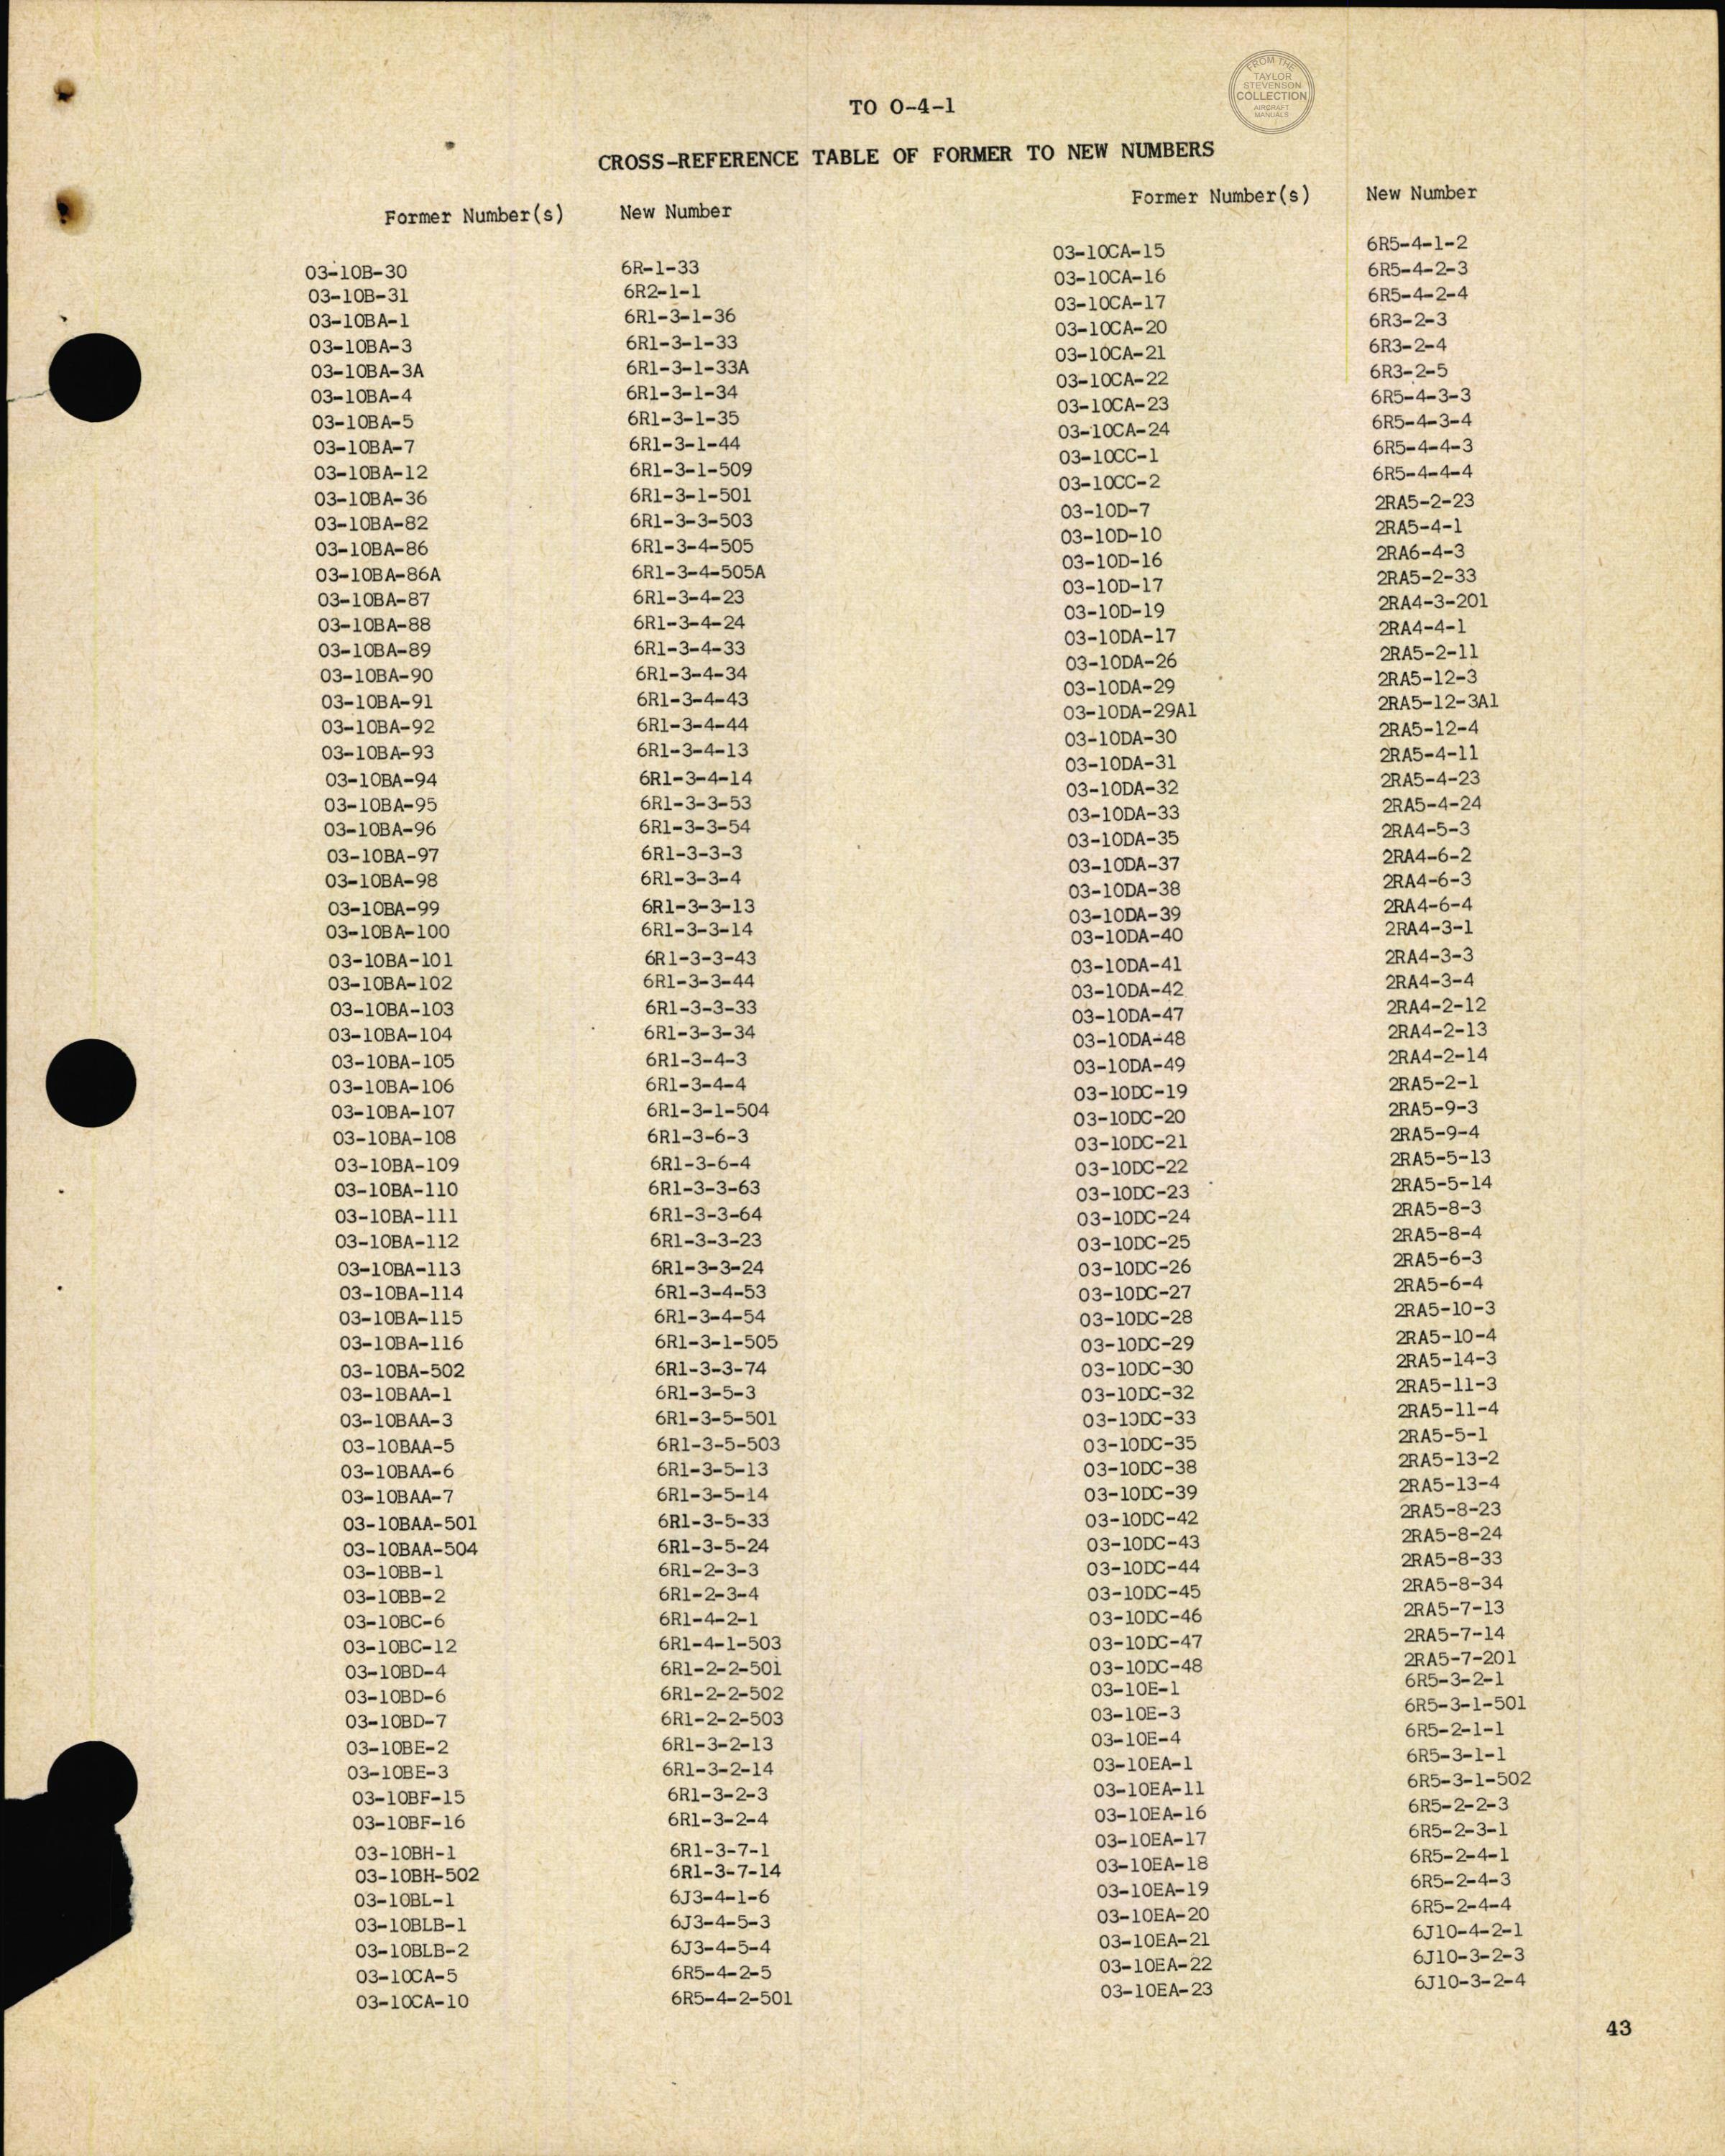 Sample page 45 from AirCorps Library document: Cross Reference Table of Former to New Numbers